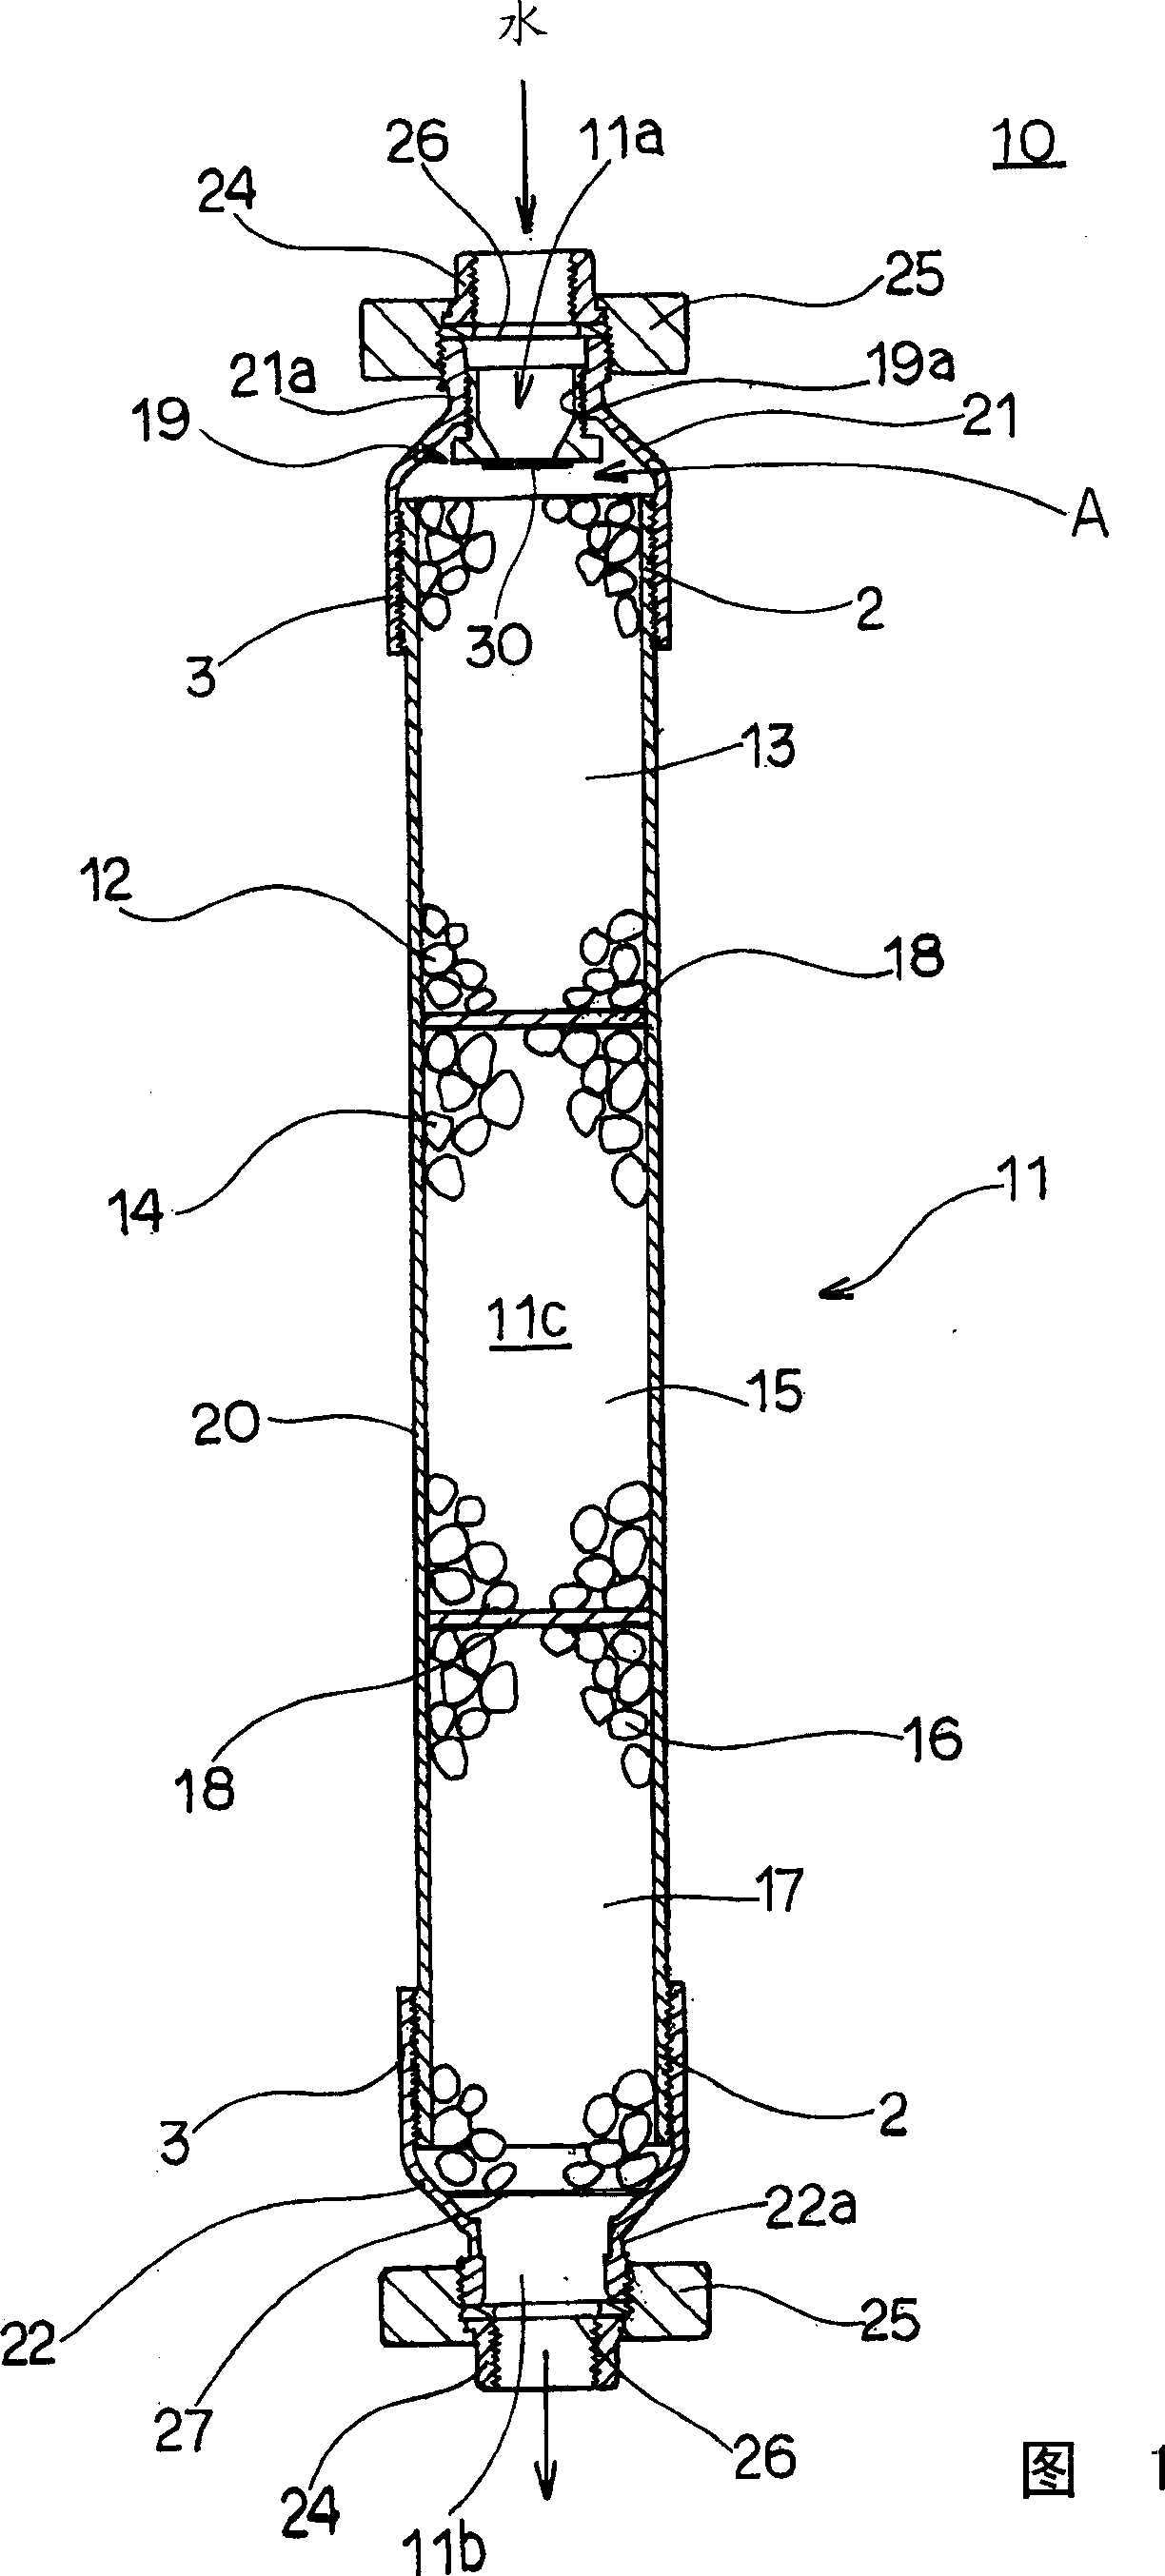 Water activating device